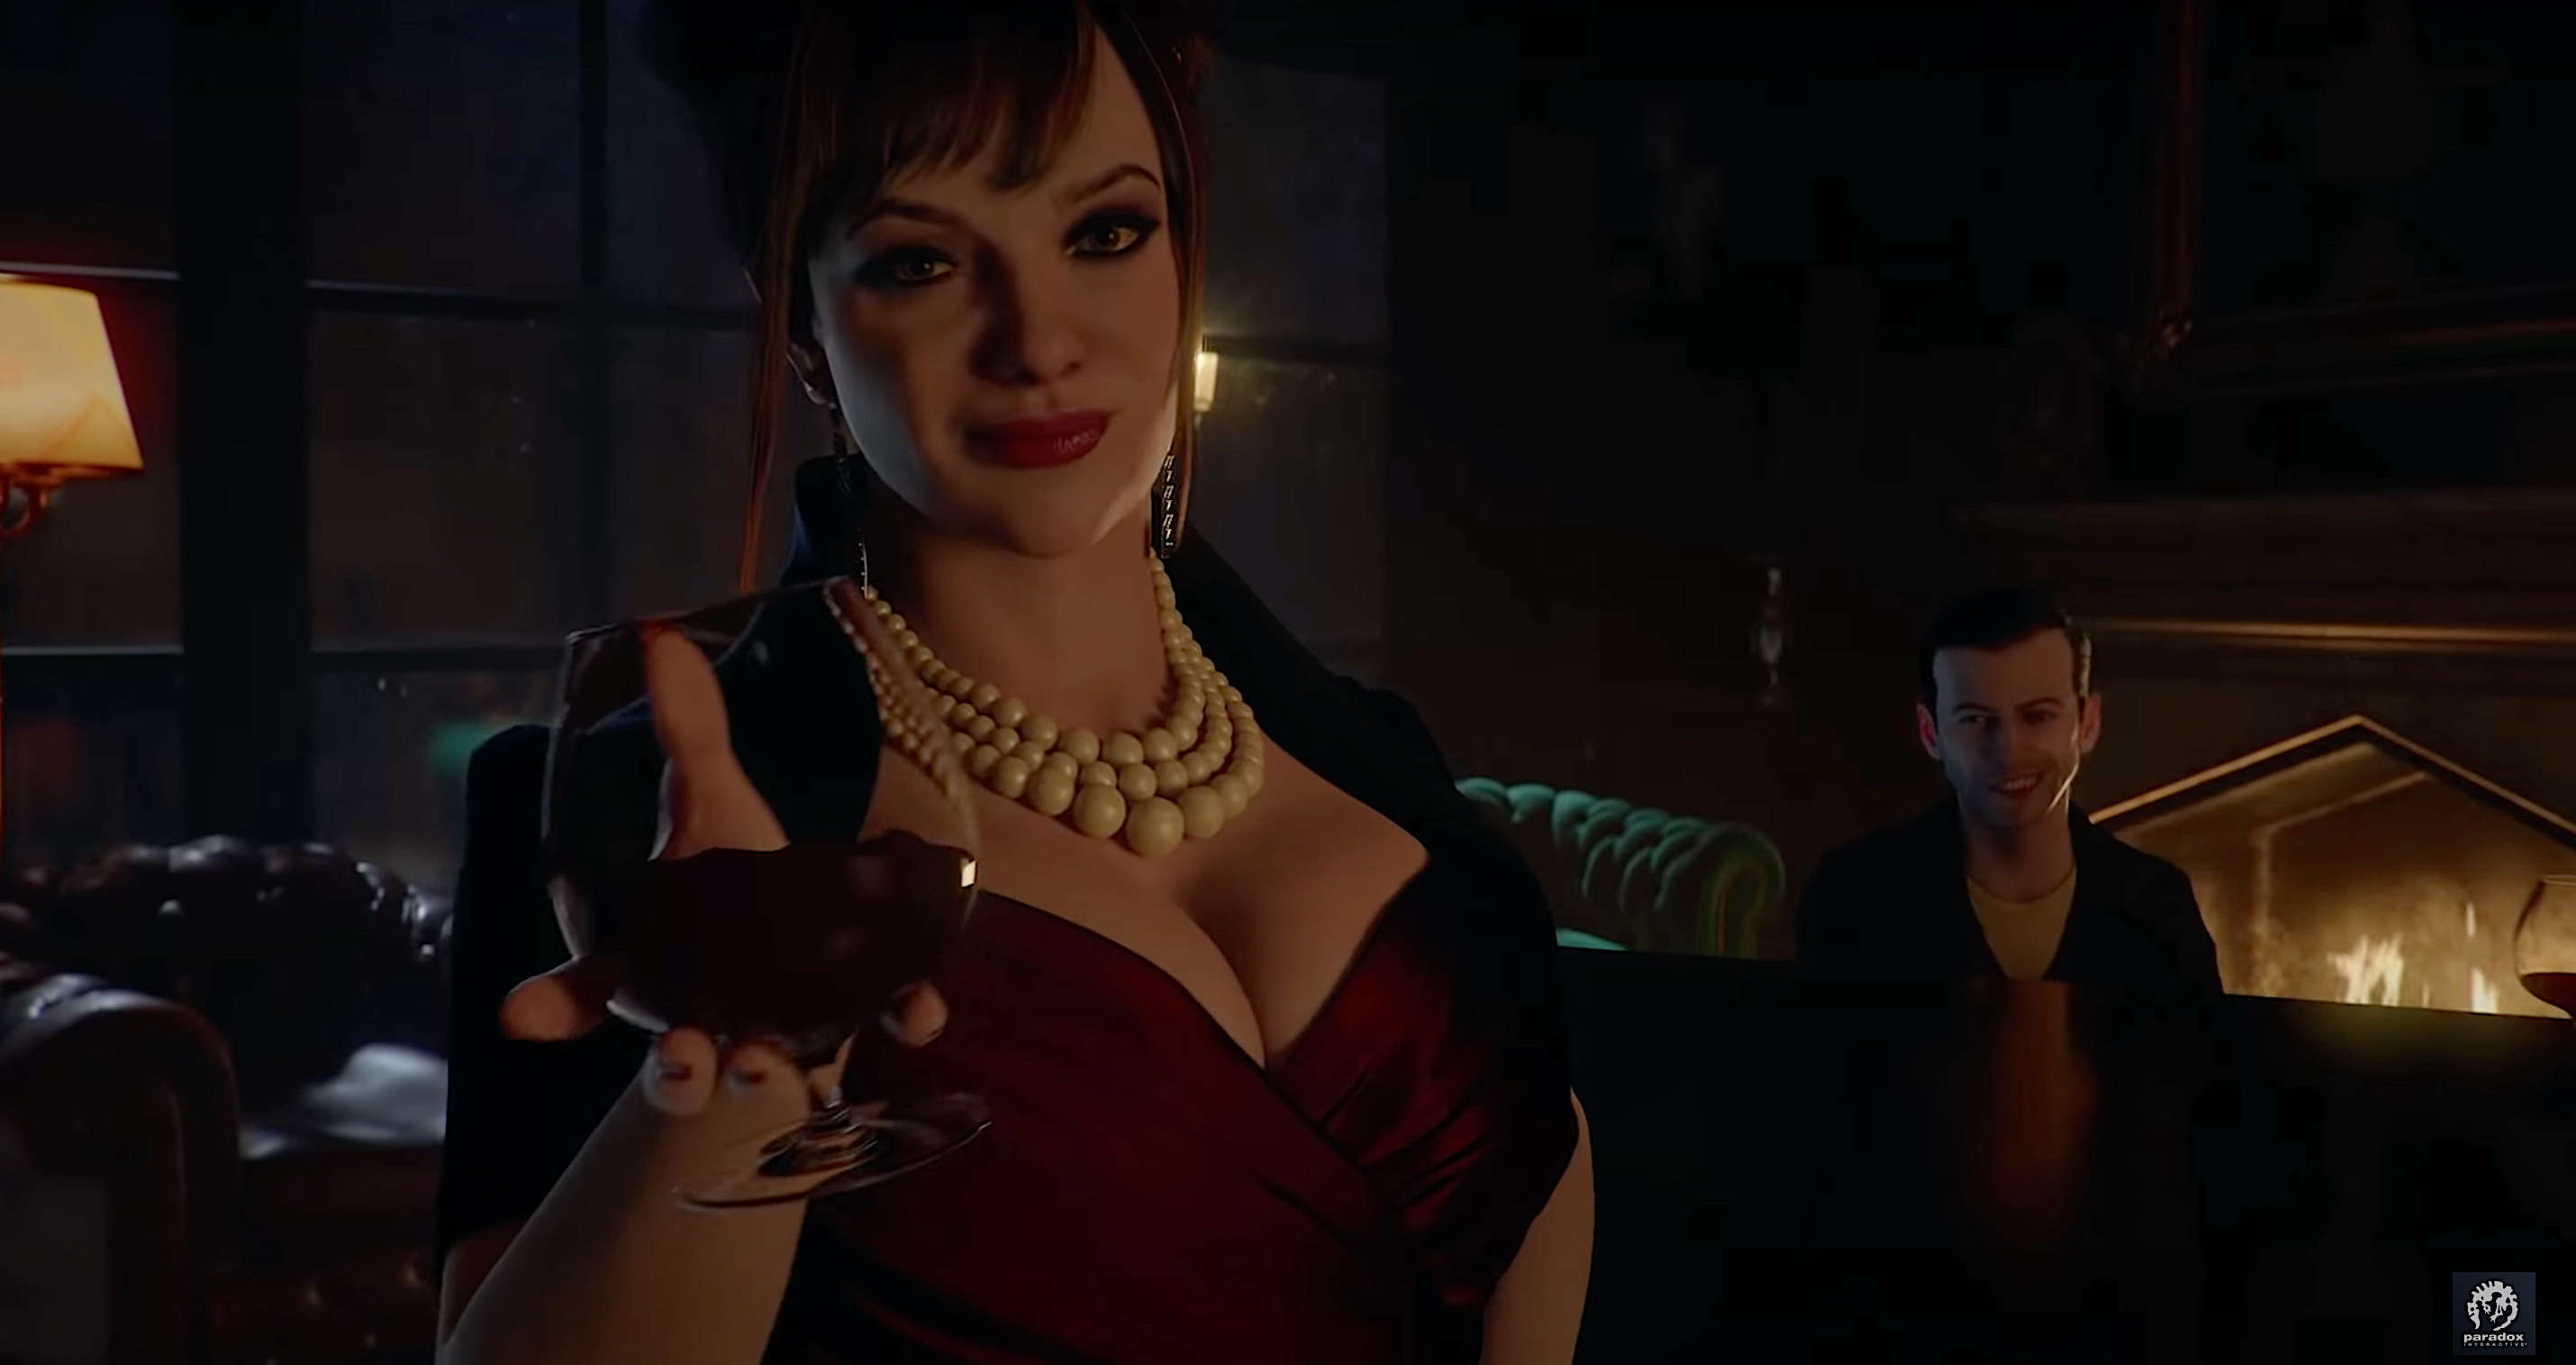 First gameplay trailers released for Vampire: The Masquerade